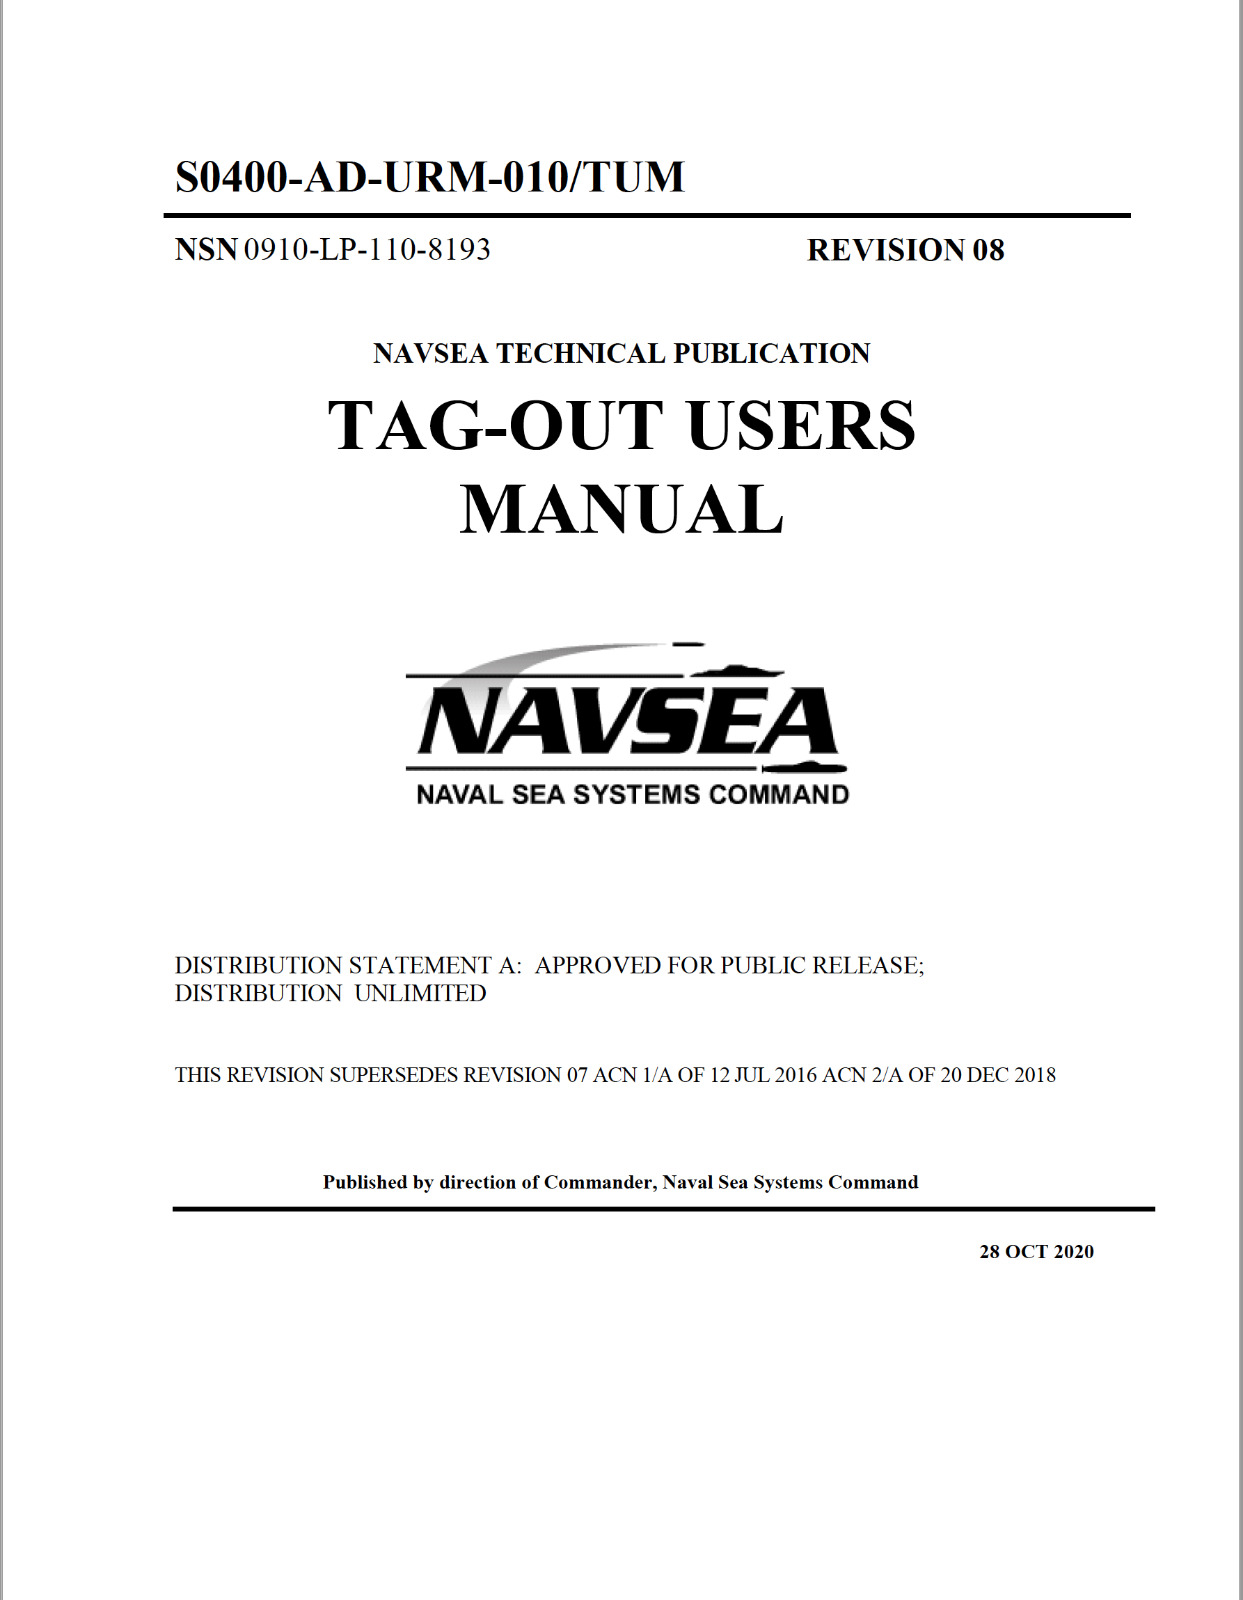 106 Page NAVSEA Navy Ship Safety TAG-OUT USERS MANUAL October 2020 on Data CD